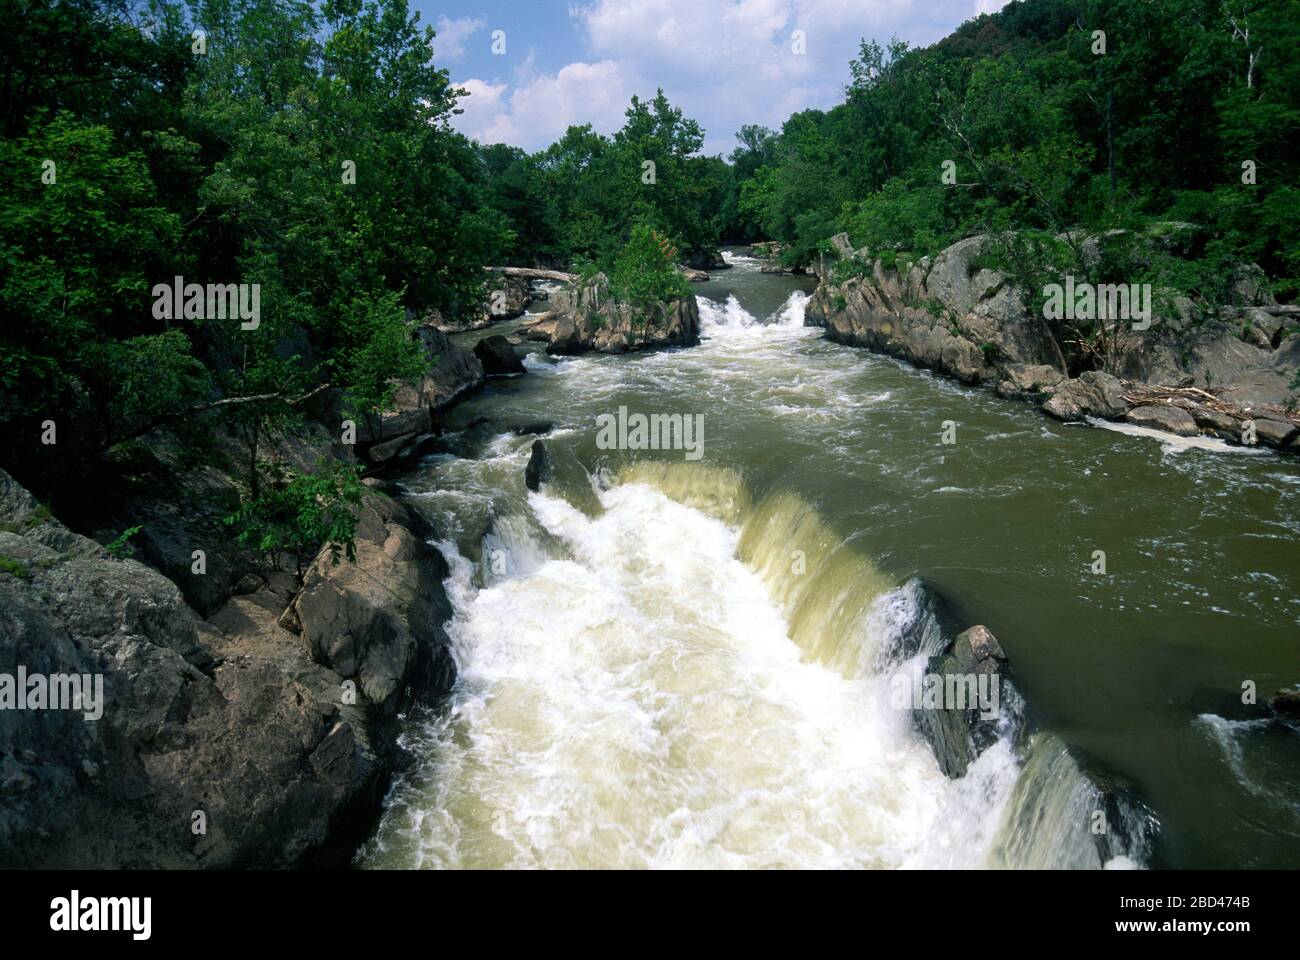 Potomac River side channel, Chesapeake & Ohio Canal National Historical Park, Great Falls Park, Maryland Stock Photo